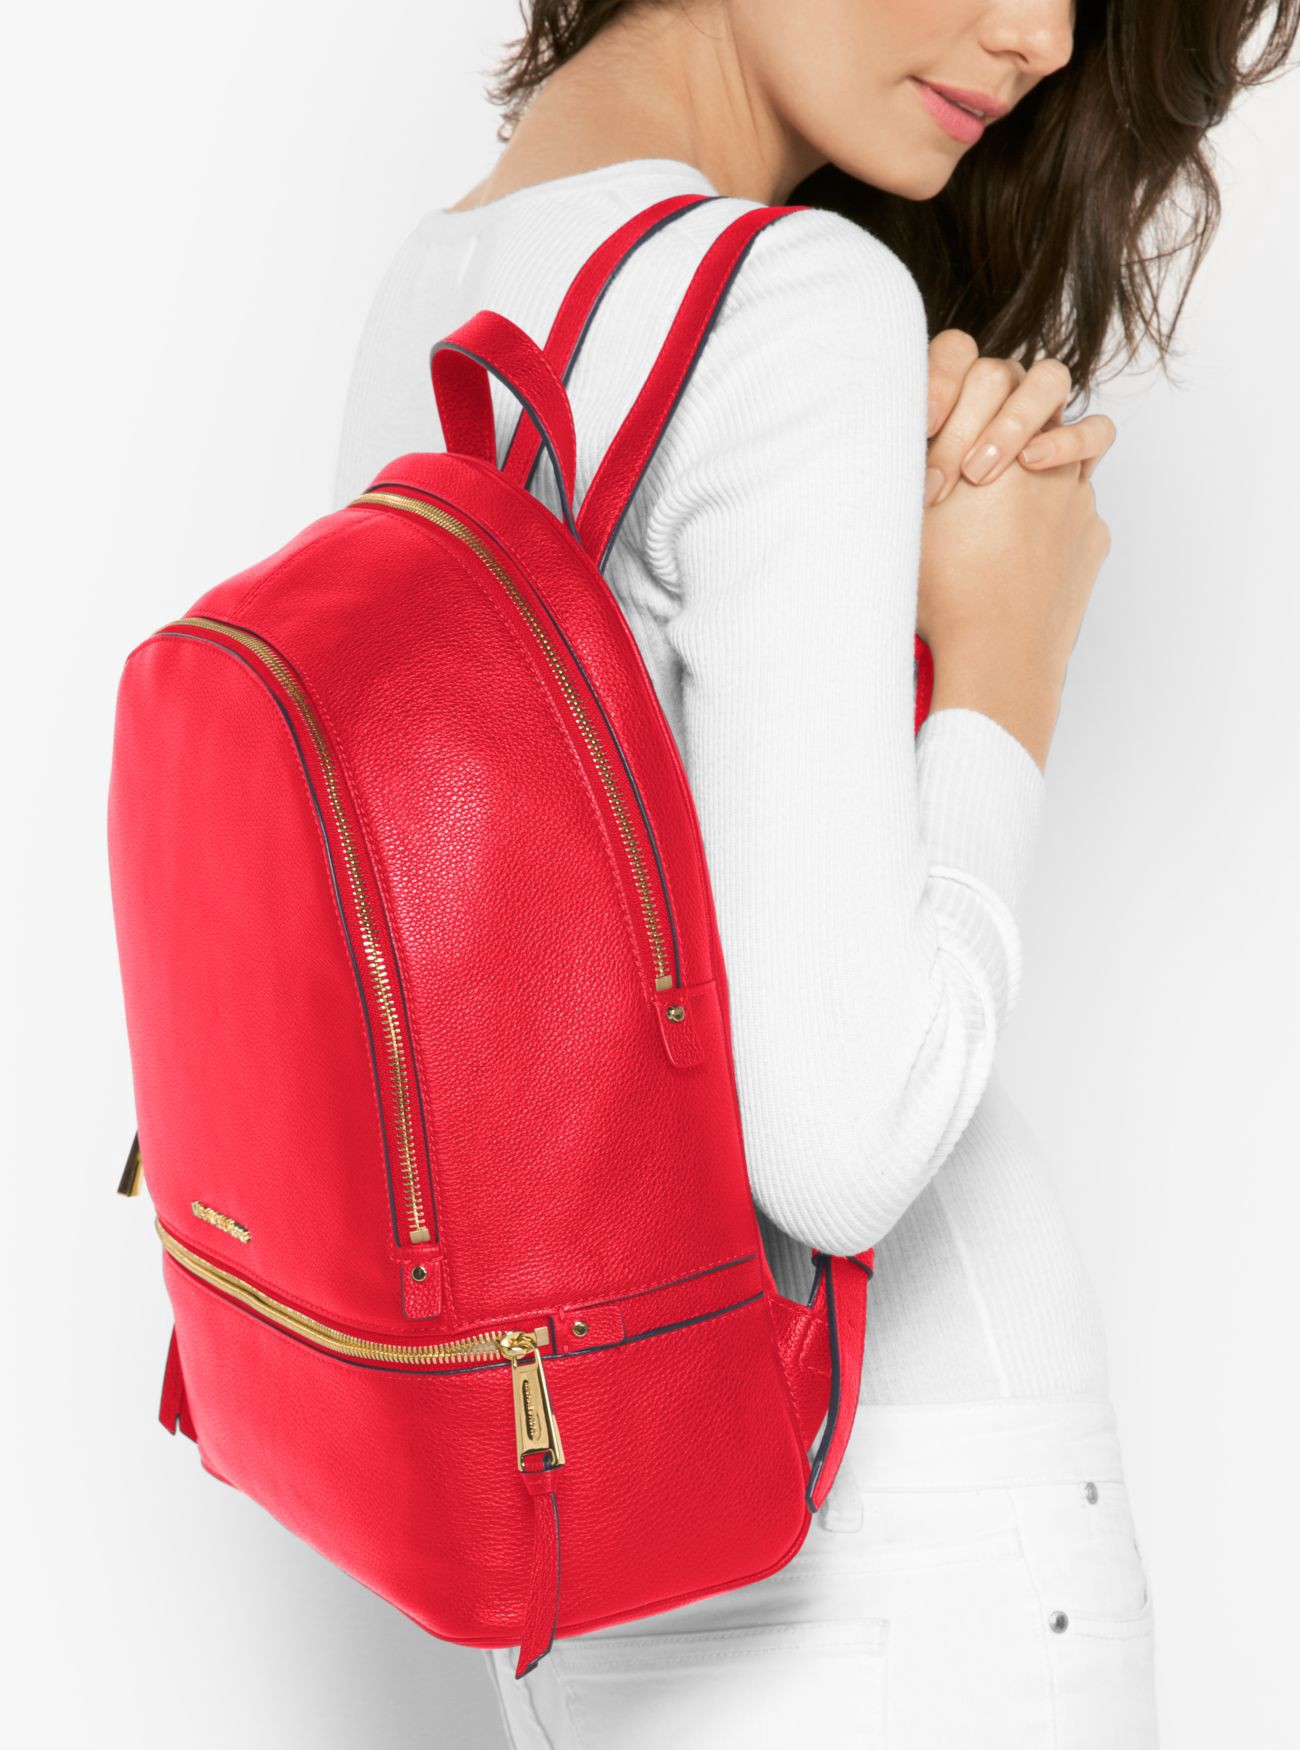 michael kors red leather backpack